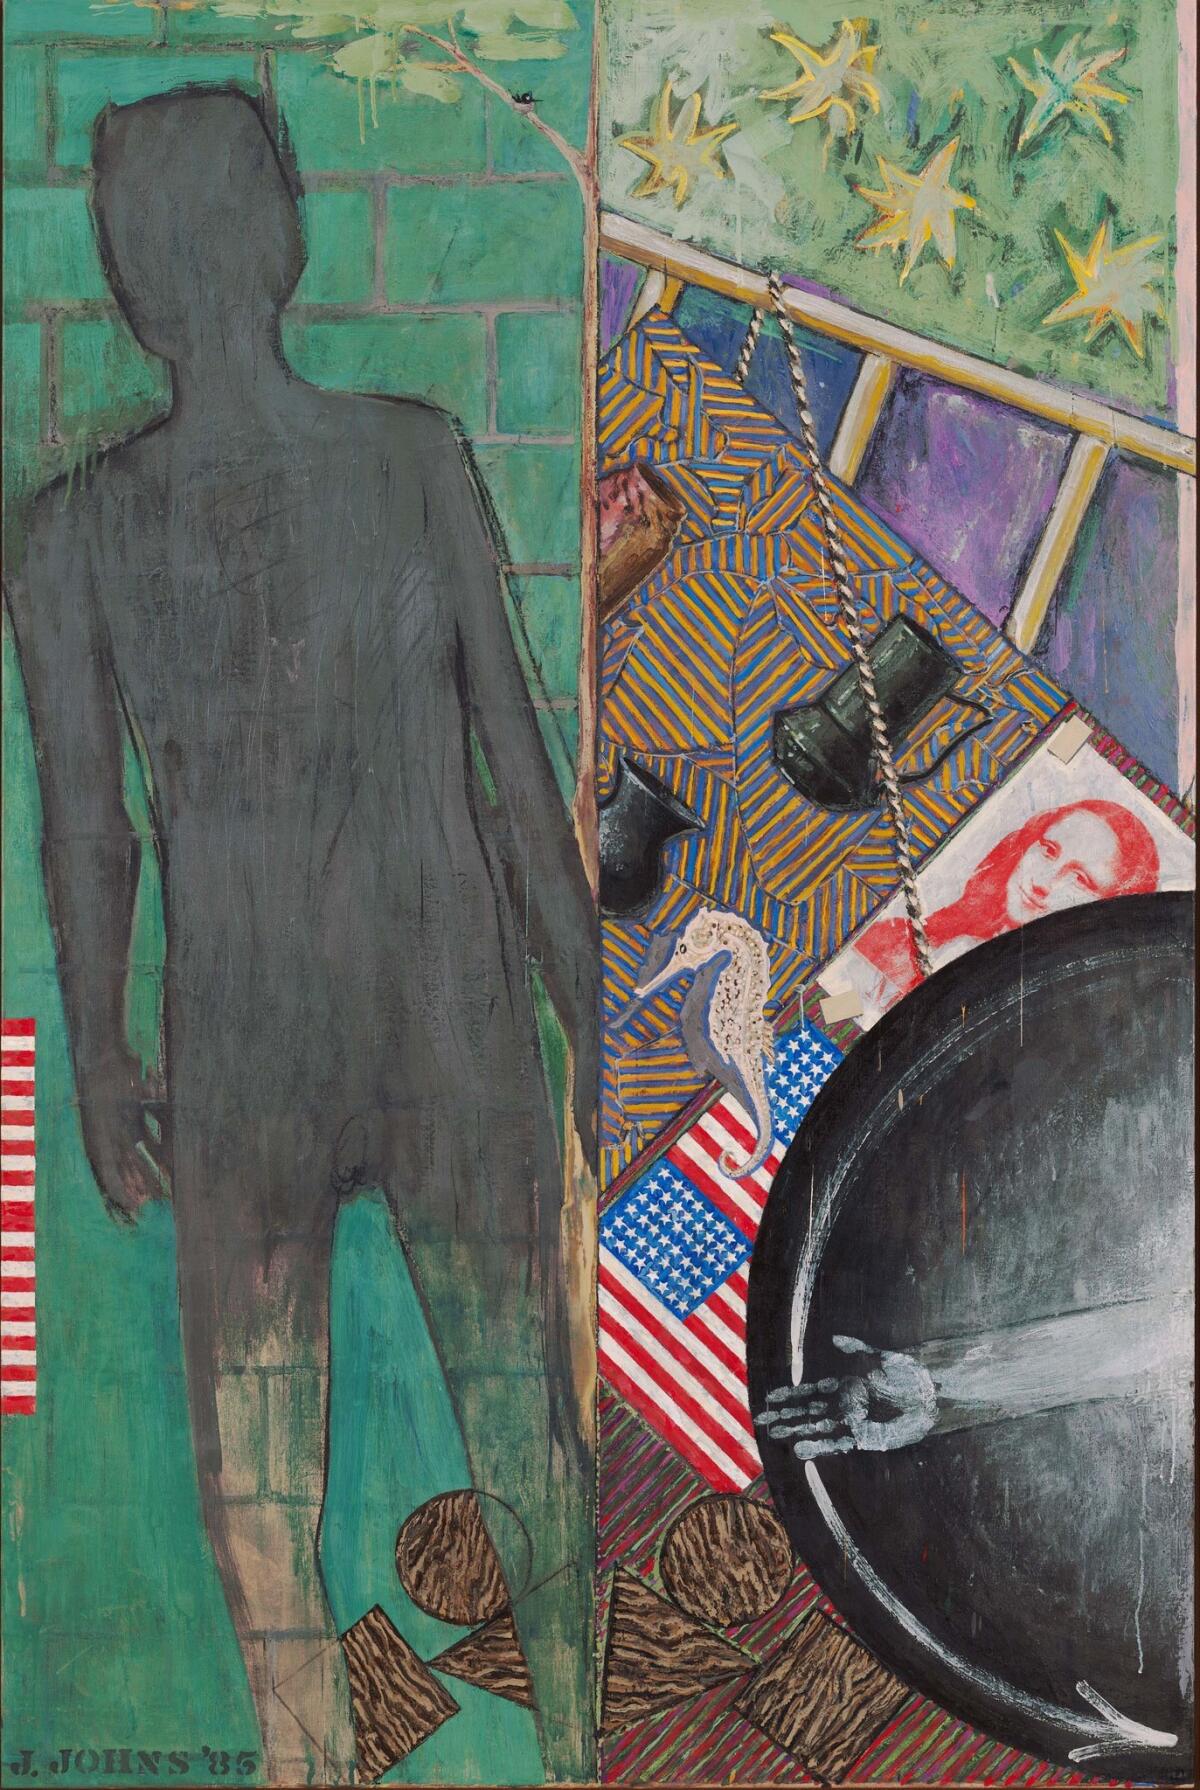 Jasper Johns' "Summer" (1985), on view at the Broad museum.